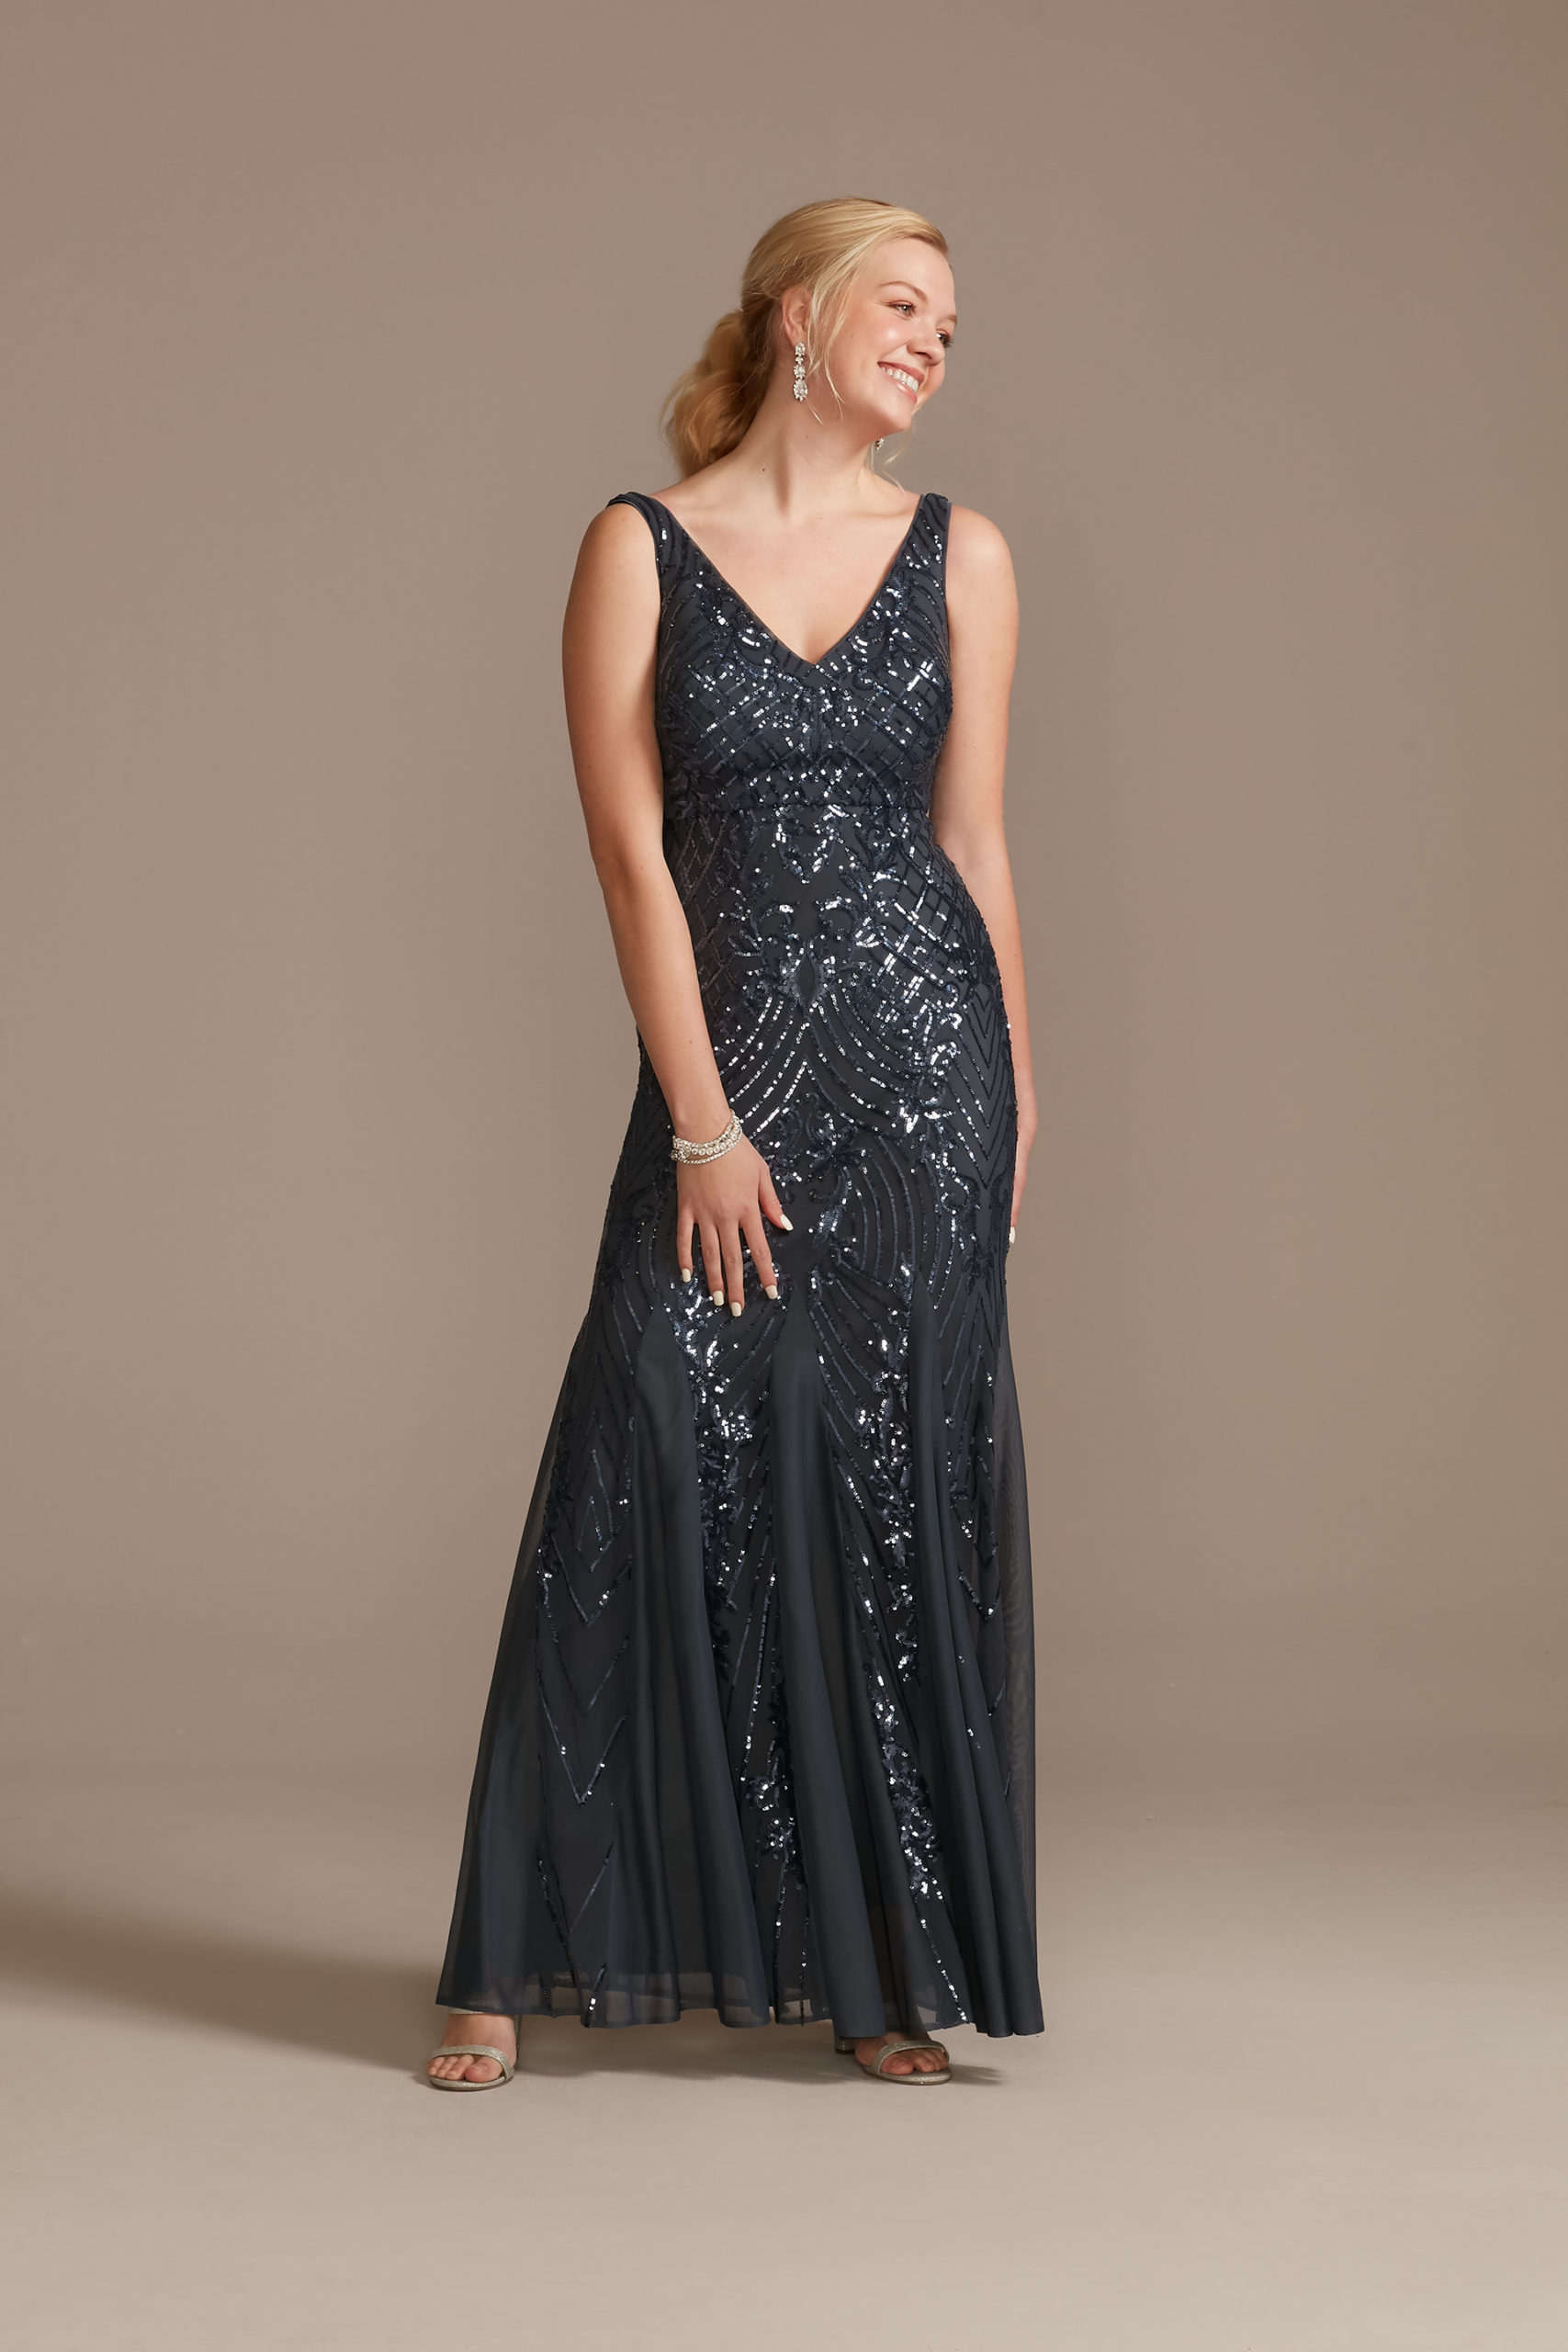 New Years Eve Outfit Inspiration beaded gown